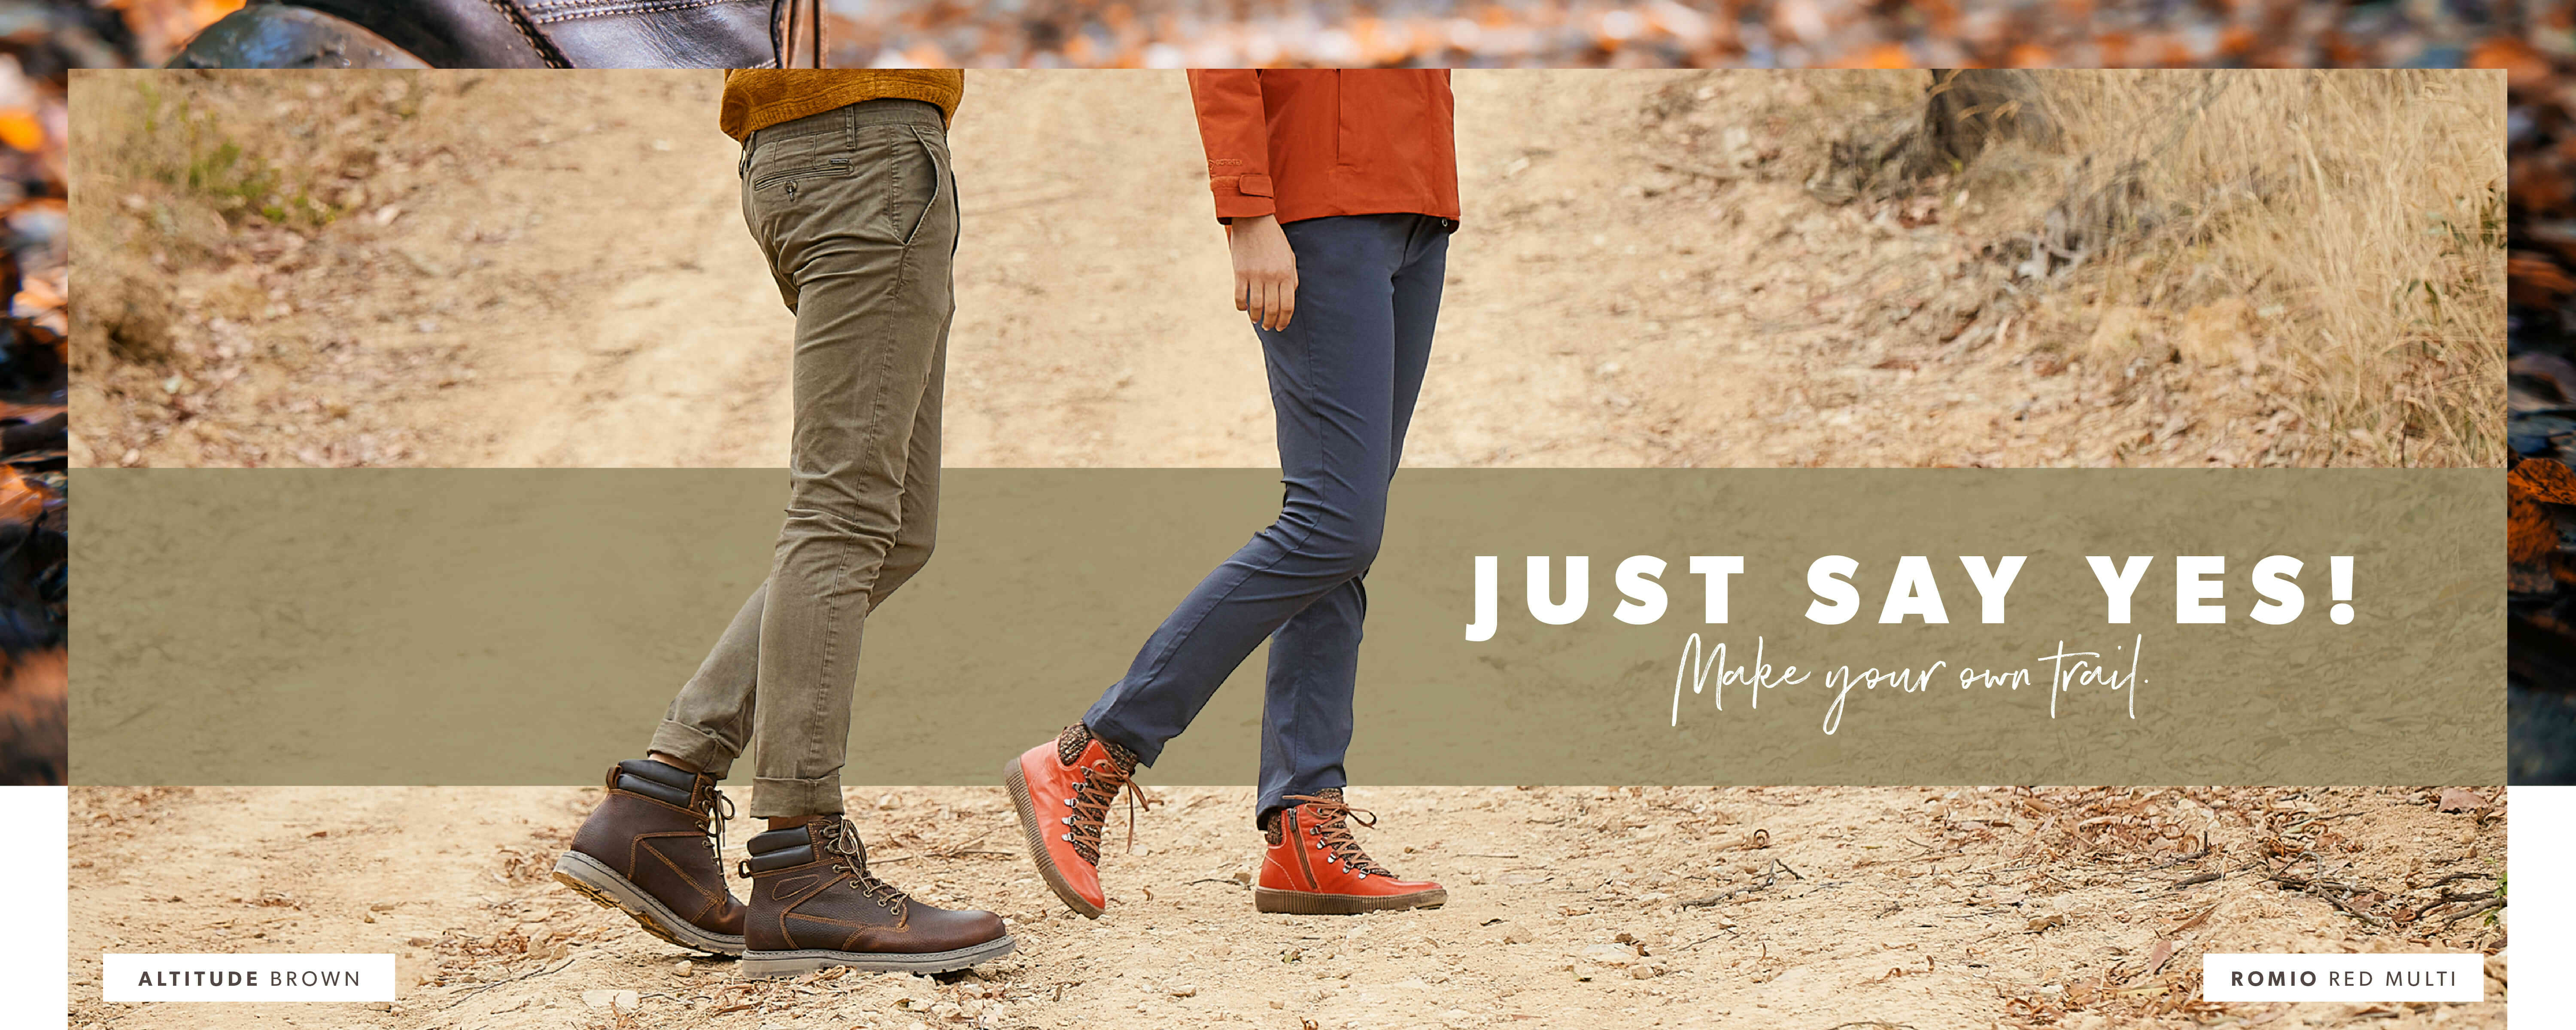 Up to 60% OFF on sale styles for men and women at Colorado Shoes